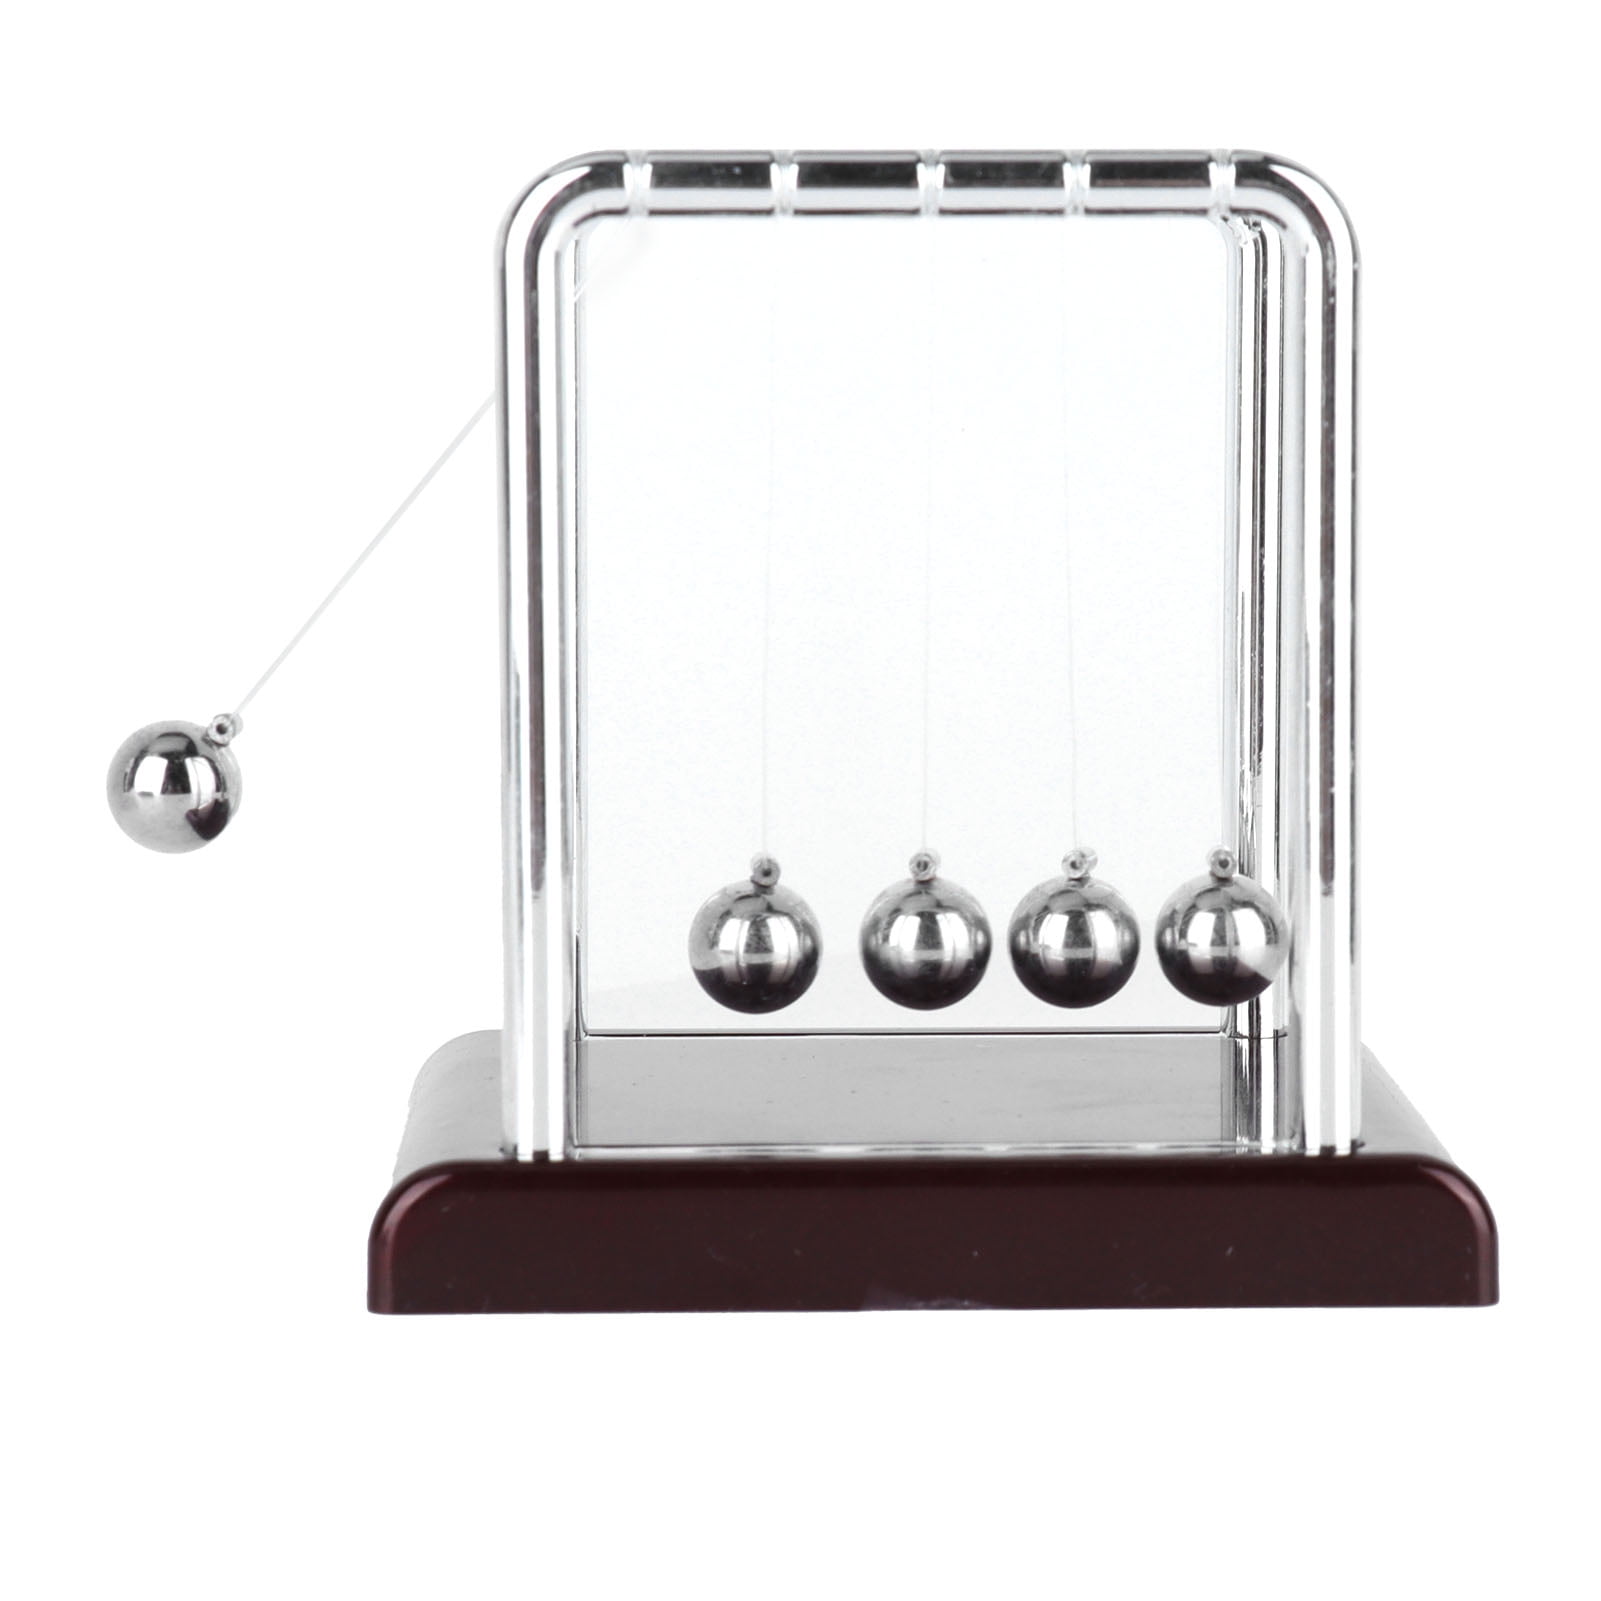 Classic Newton S Cradle Swing Ball Desk Toy Pendulum Stainless Steel Ball Stress Relief Gift Office Desk Gadgets Physics Science Home Decorations 901b7adb 22d3 47b9 82a9 3bc6a5434afd.a209ad35bf849f63ff80077c11a01848 